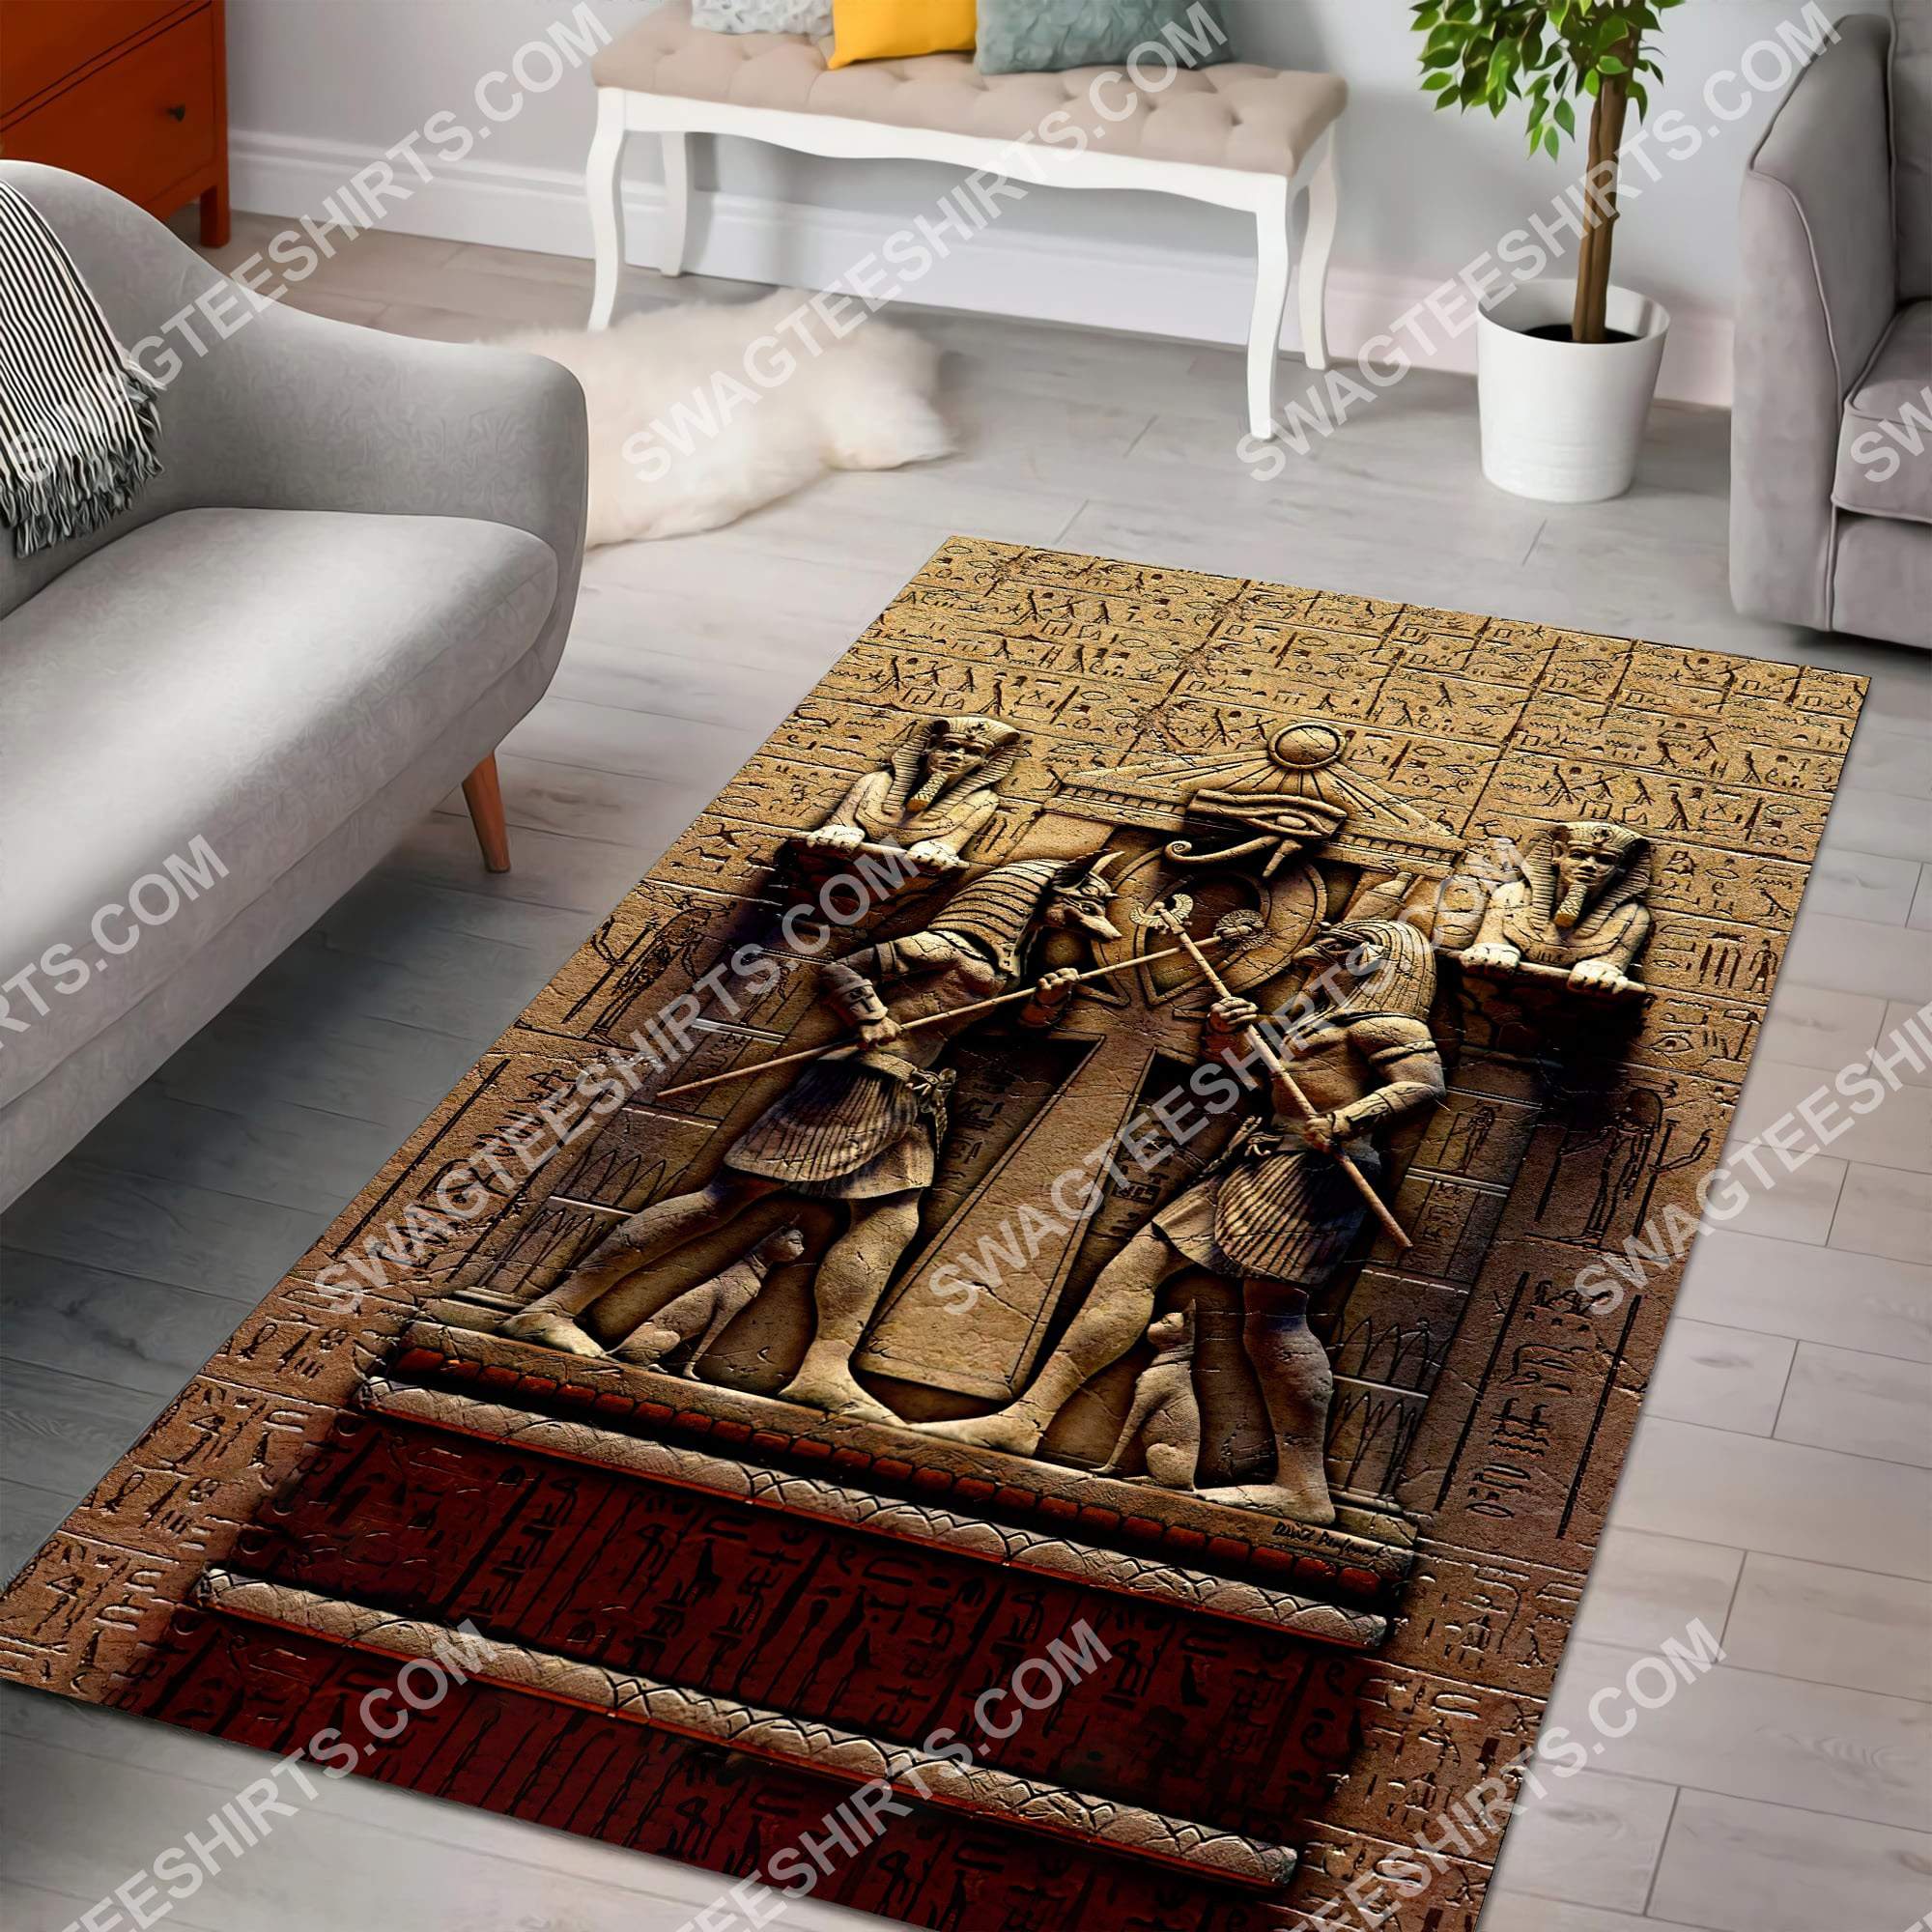 anubis egyptian civilization culture all over printed rug 2(1)